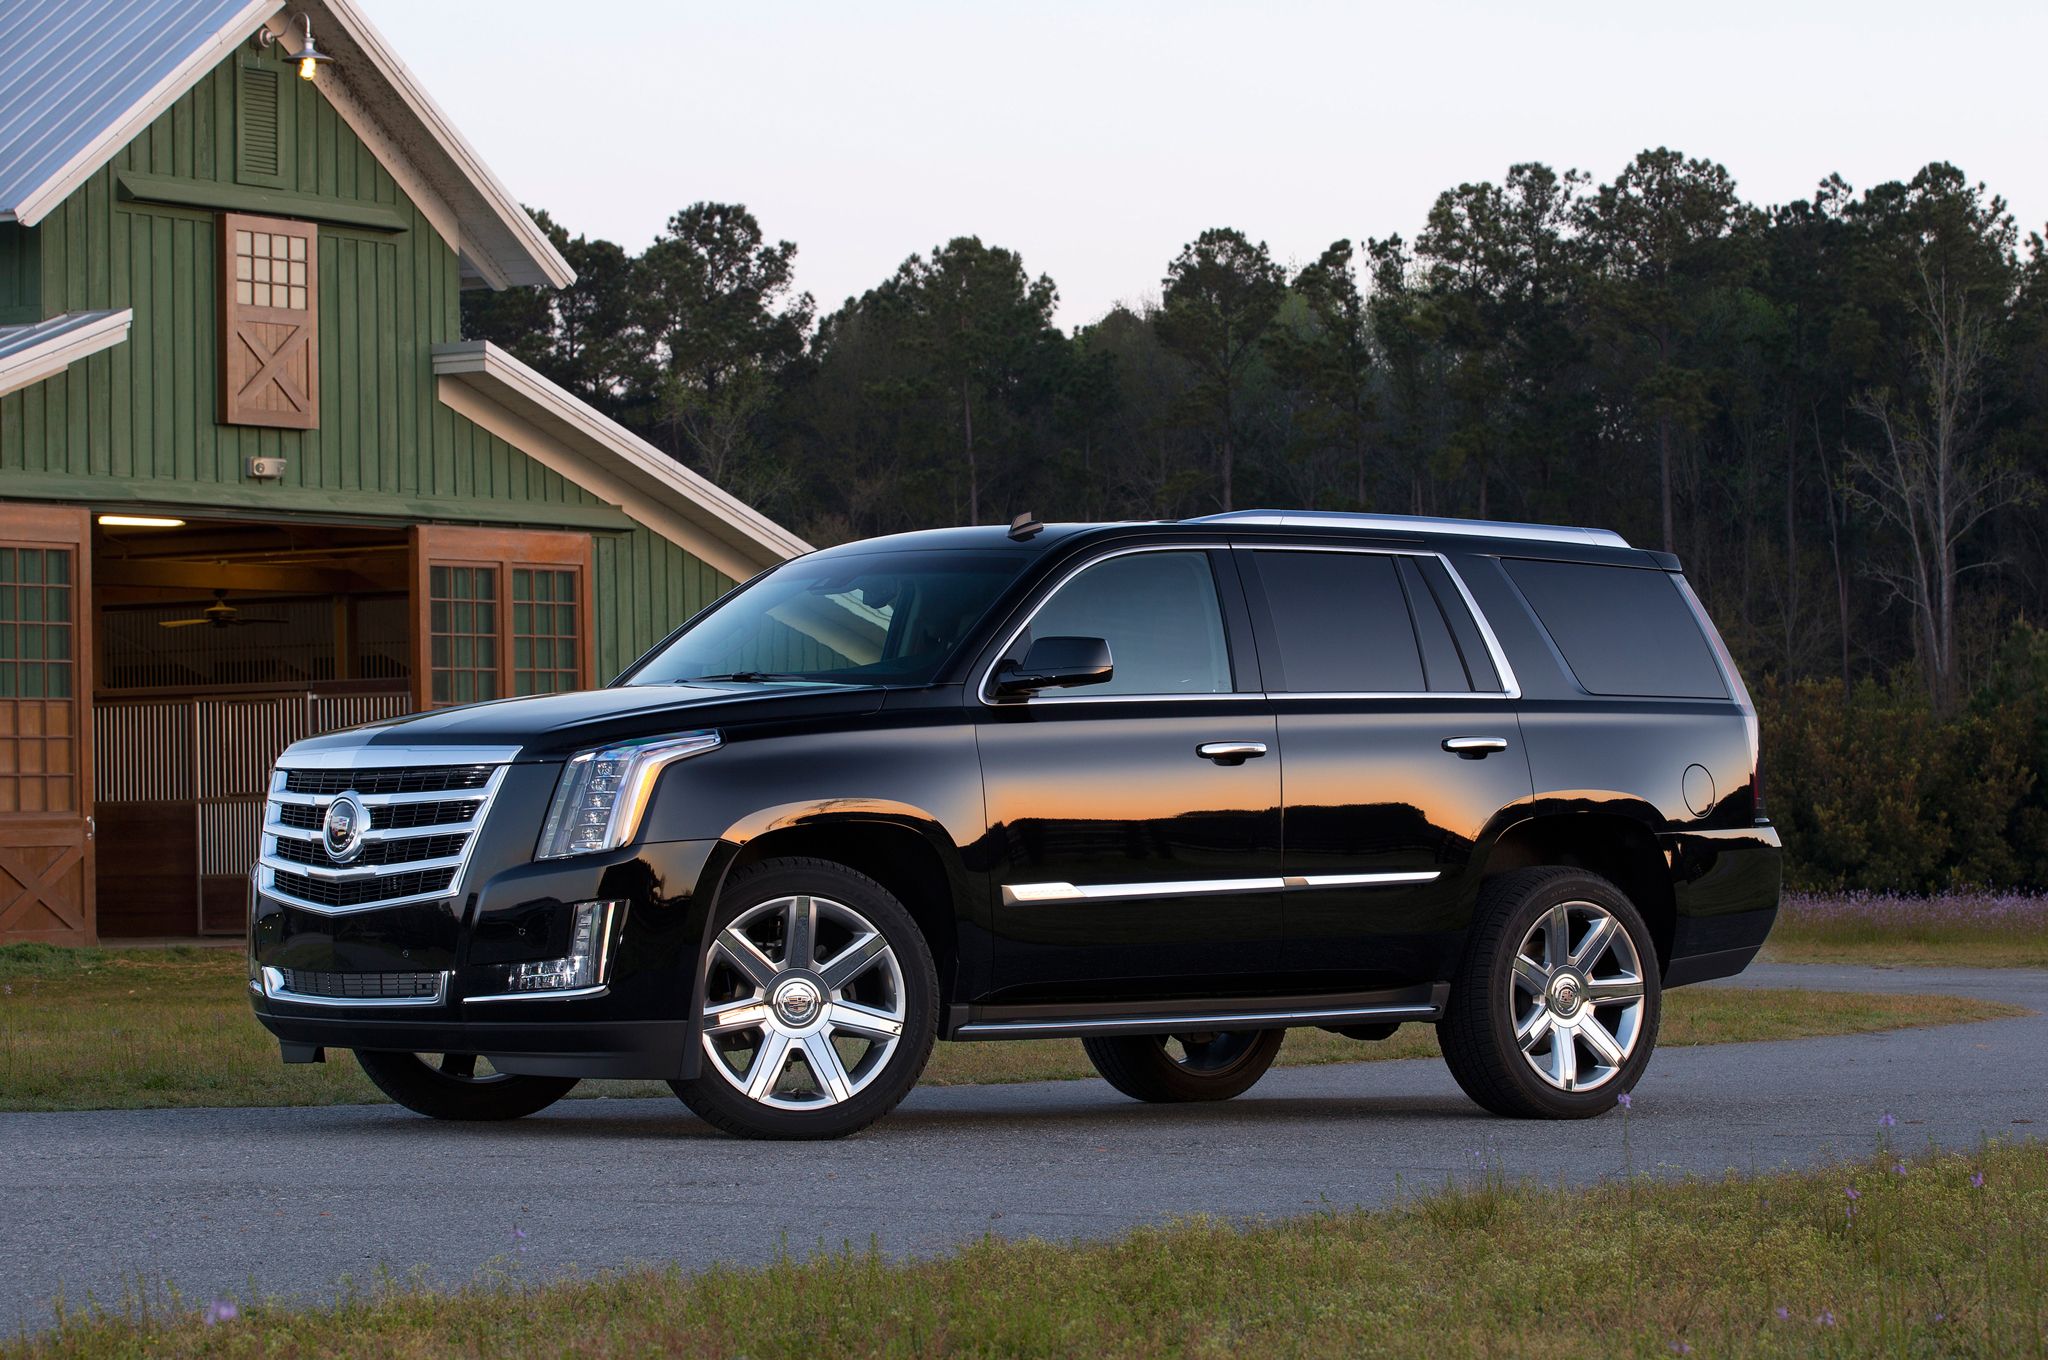 2015 Cadillac Escalade Side Profile (View 12 of 14)